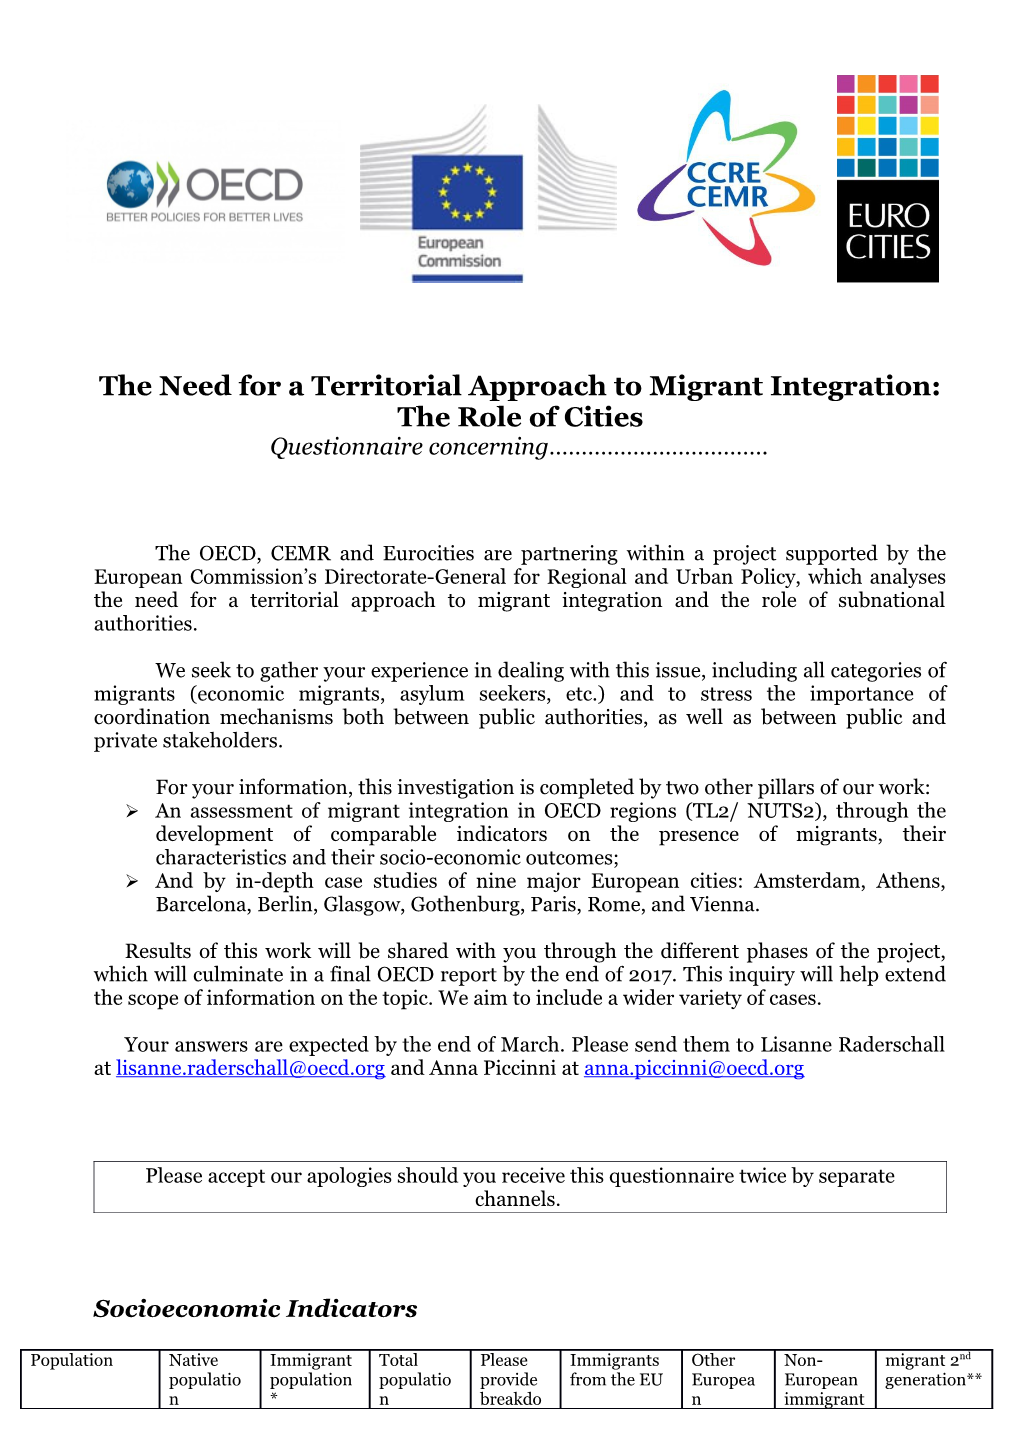 The Need for a Territorial Approach to Migrant Integration